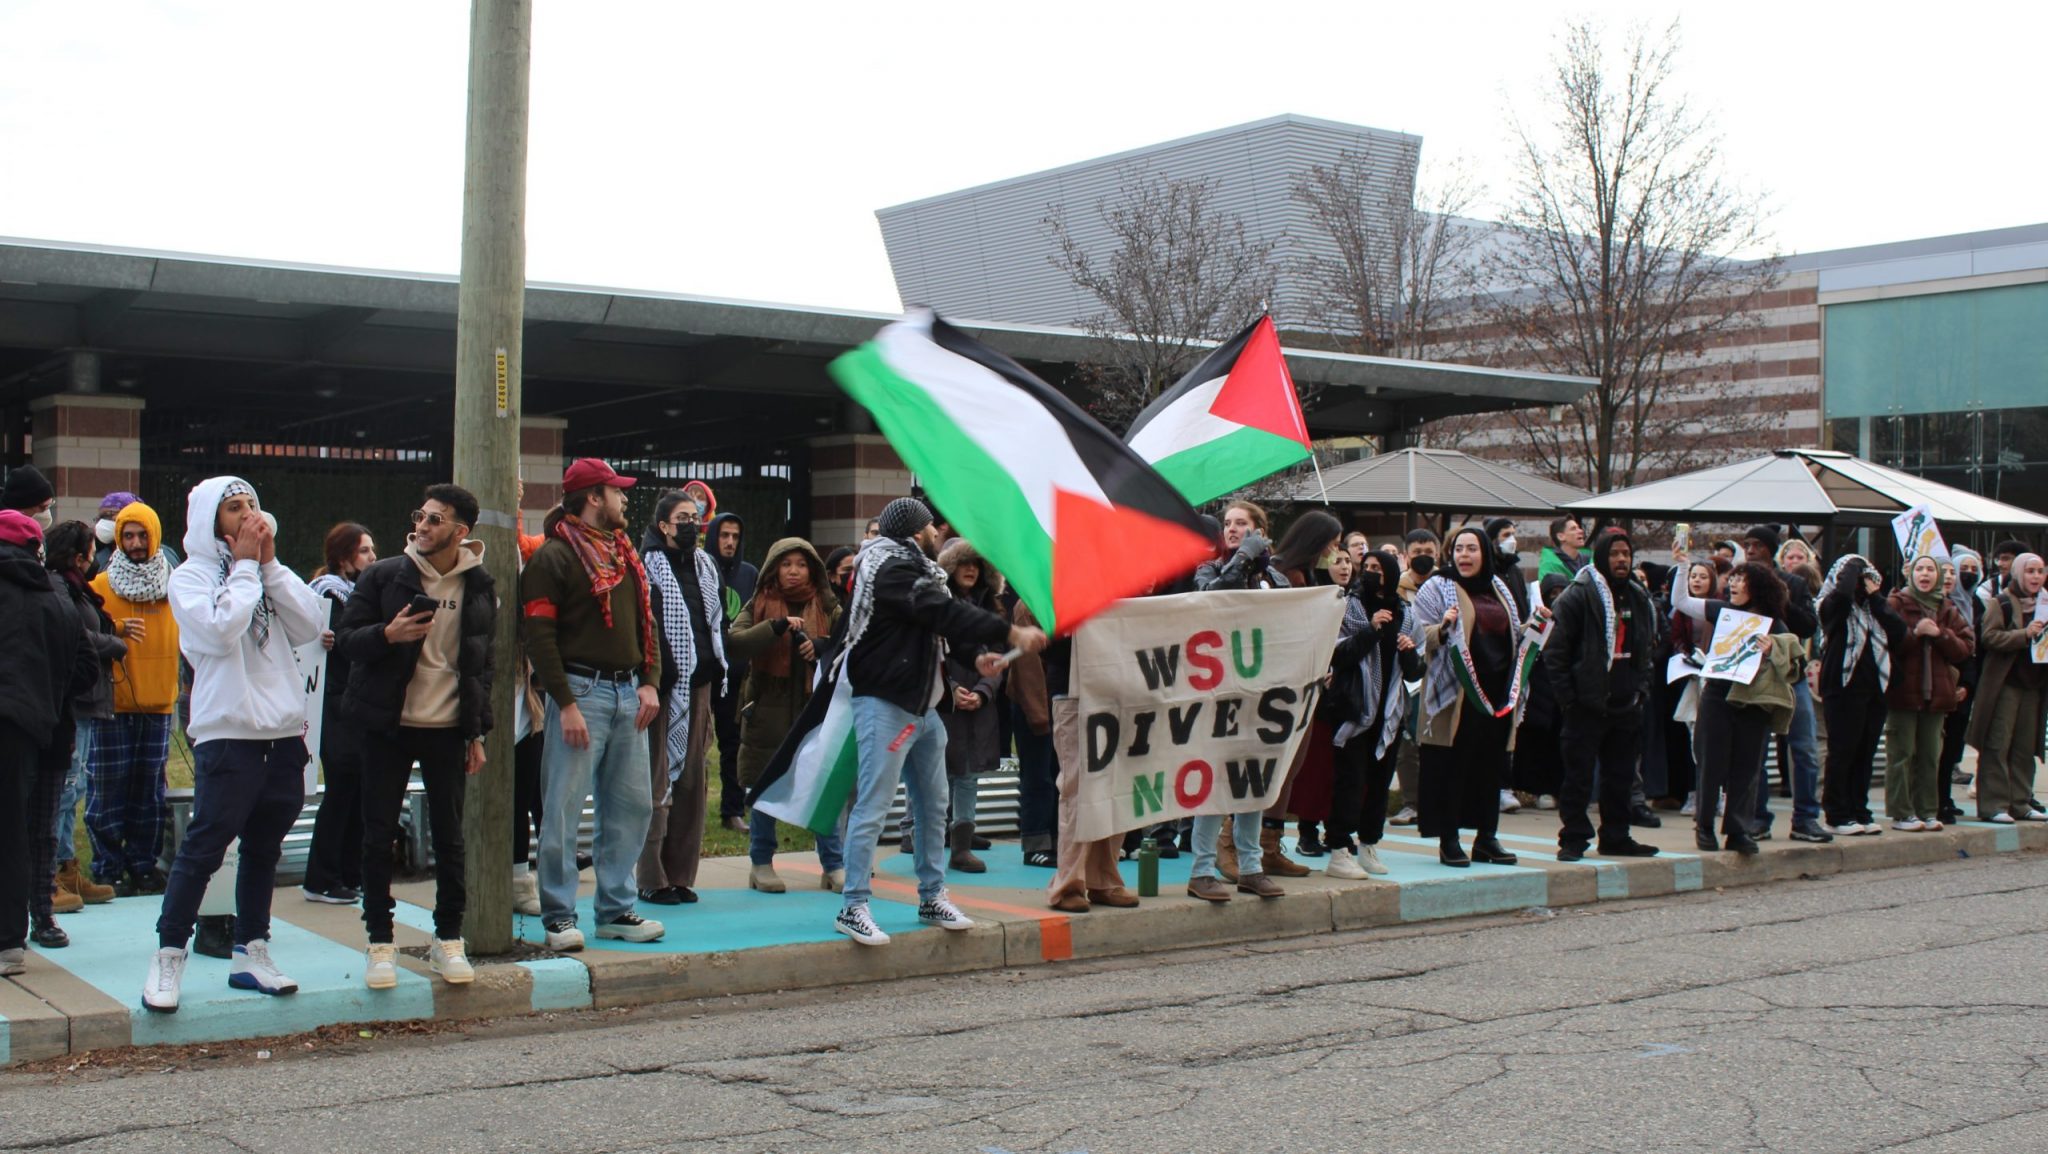 Students gathered outside the Wayne State University Board of Governors meeting on Thursday, Dec. 7, to demand the university's divestment from companies that profit from war.